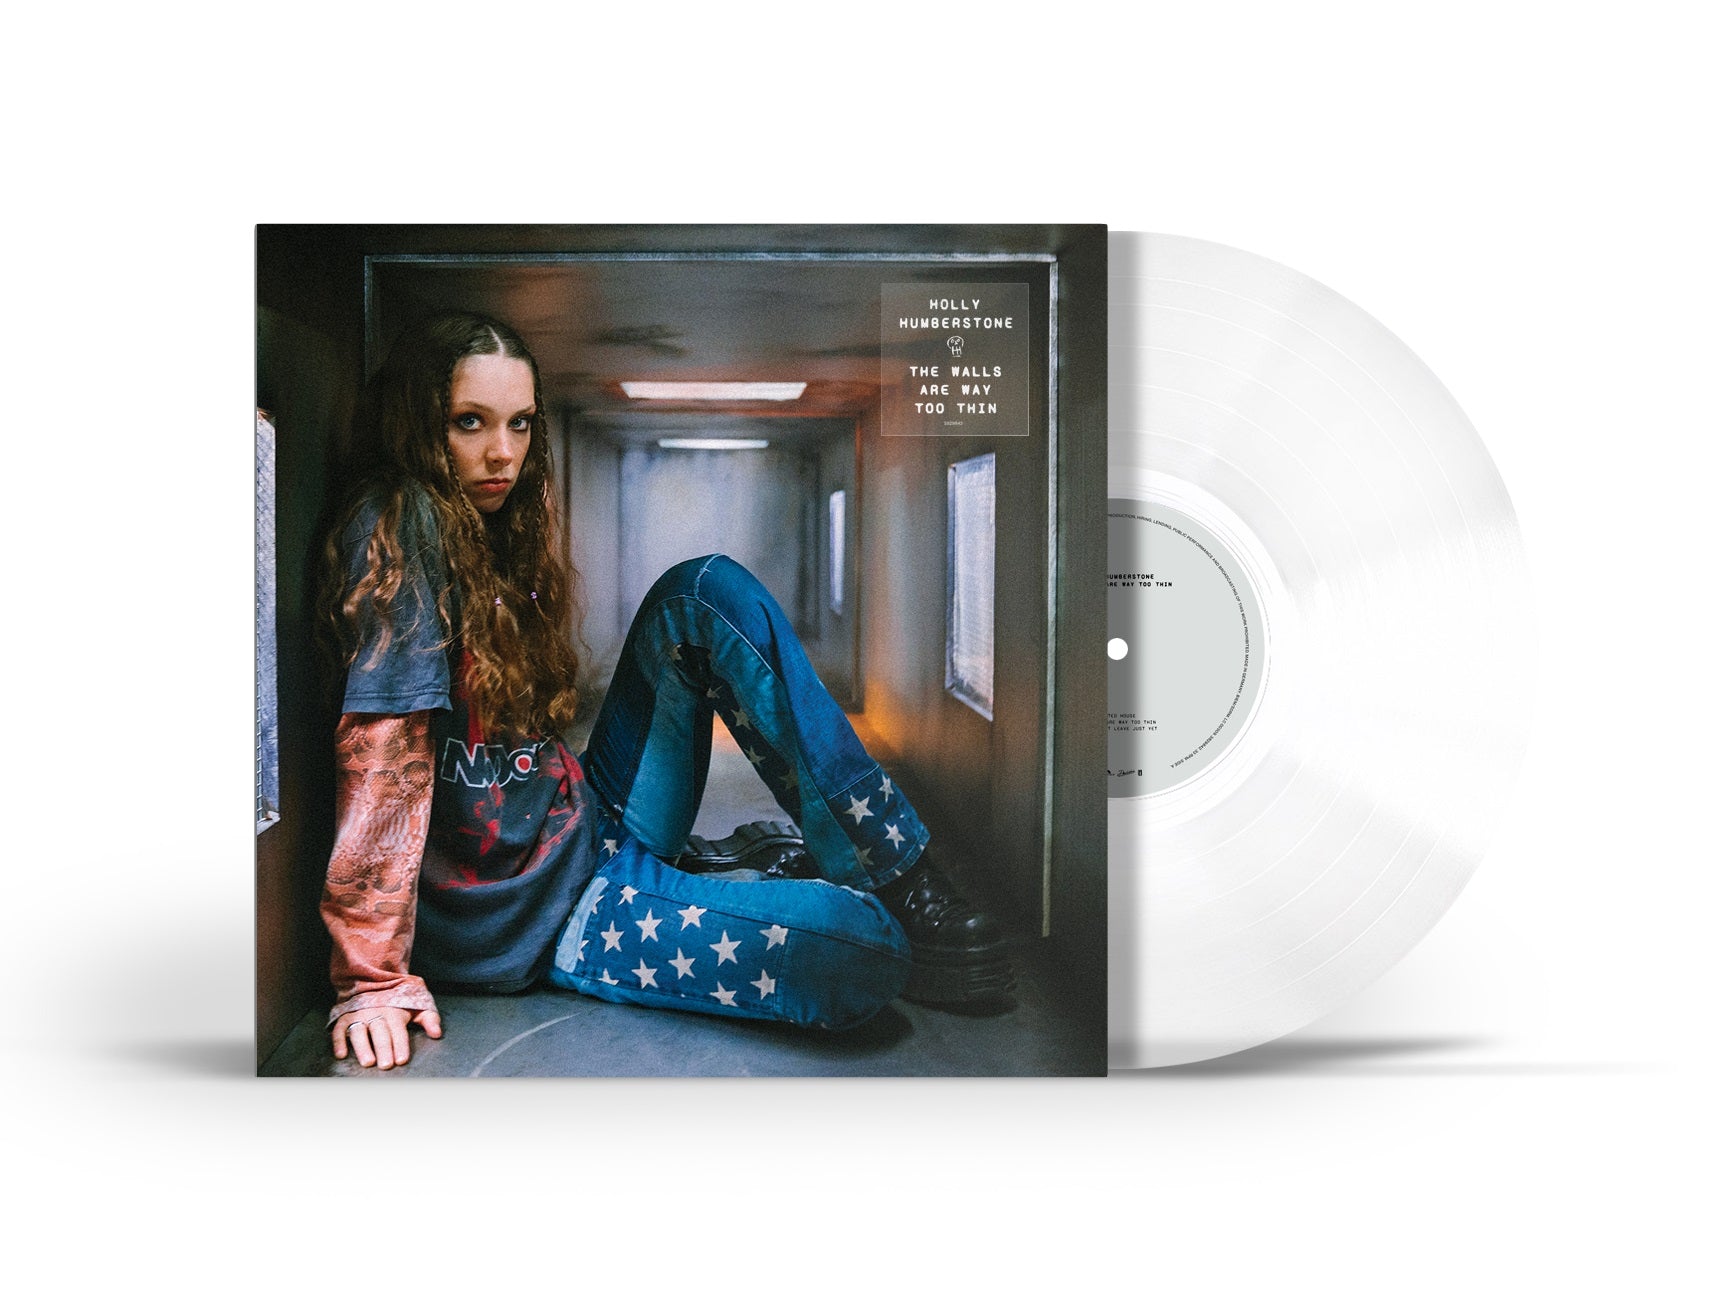 Holly Humberstone - The Walls Are Way Too Thin (Ltd. Ed. Clear Vinyl) - Blind Tiger Record Club